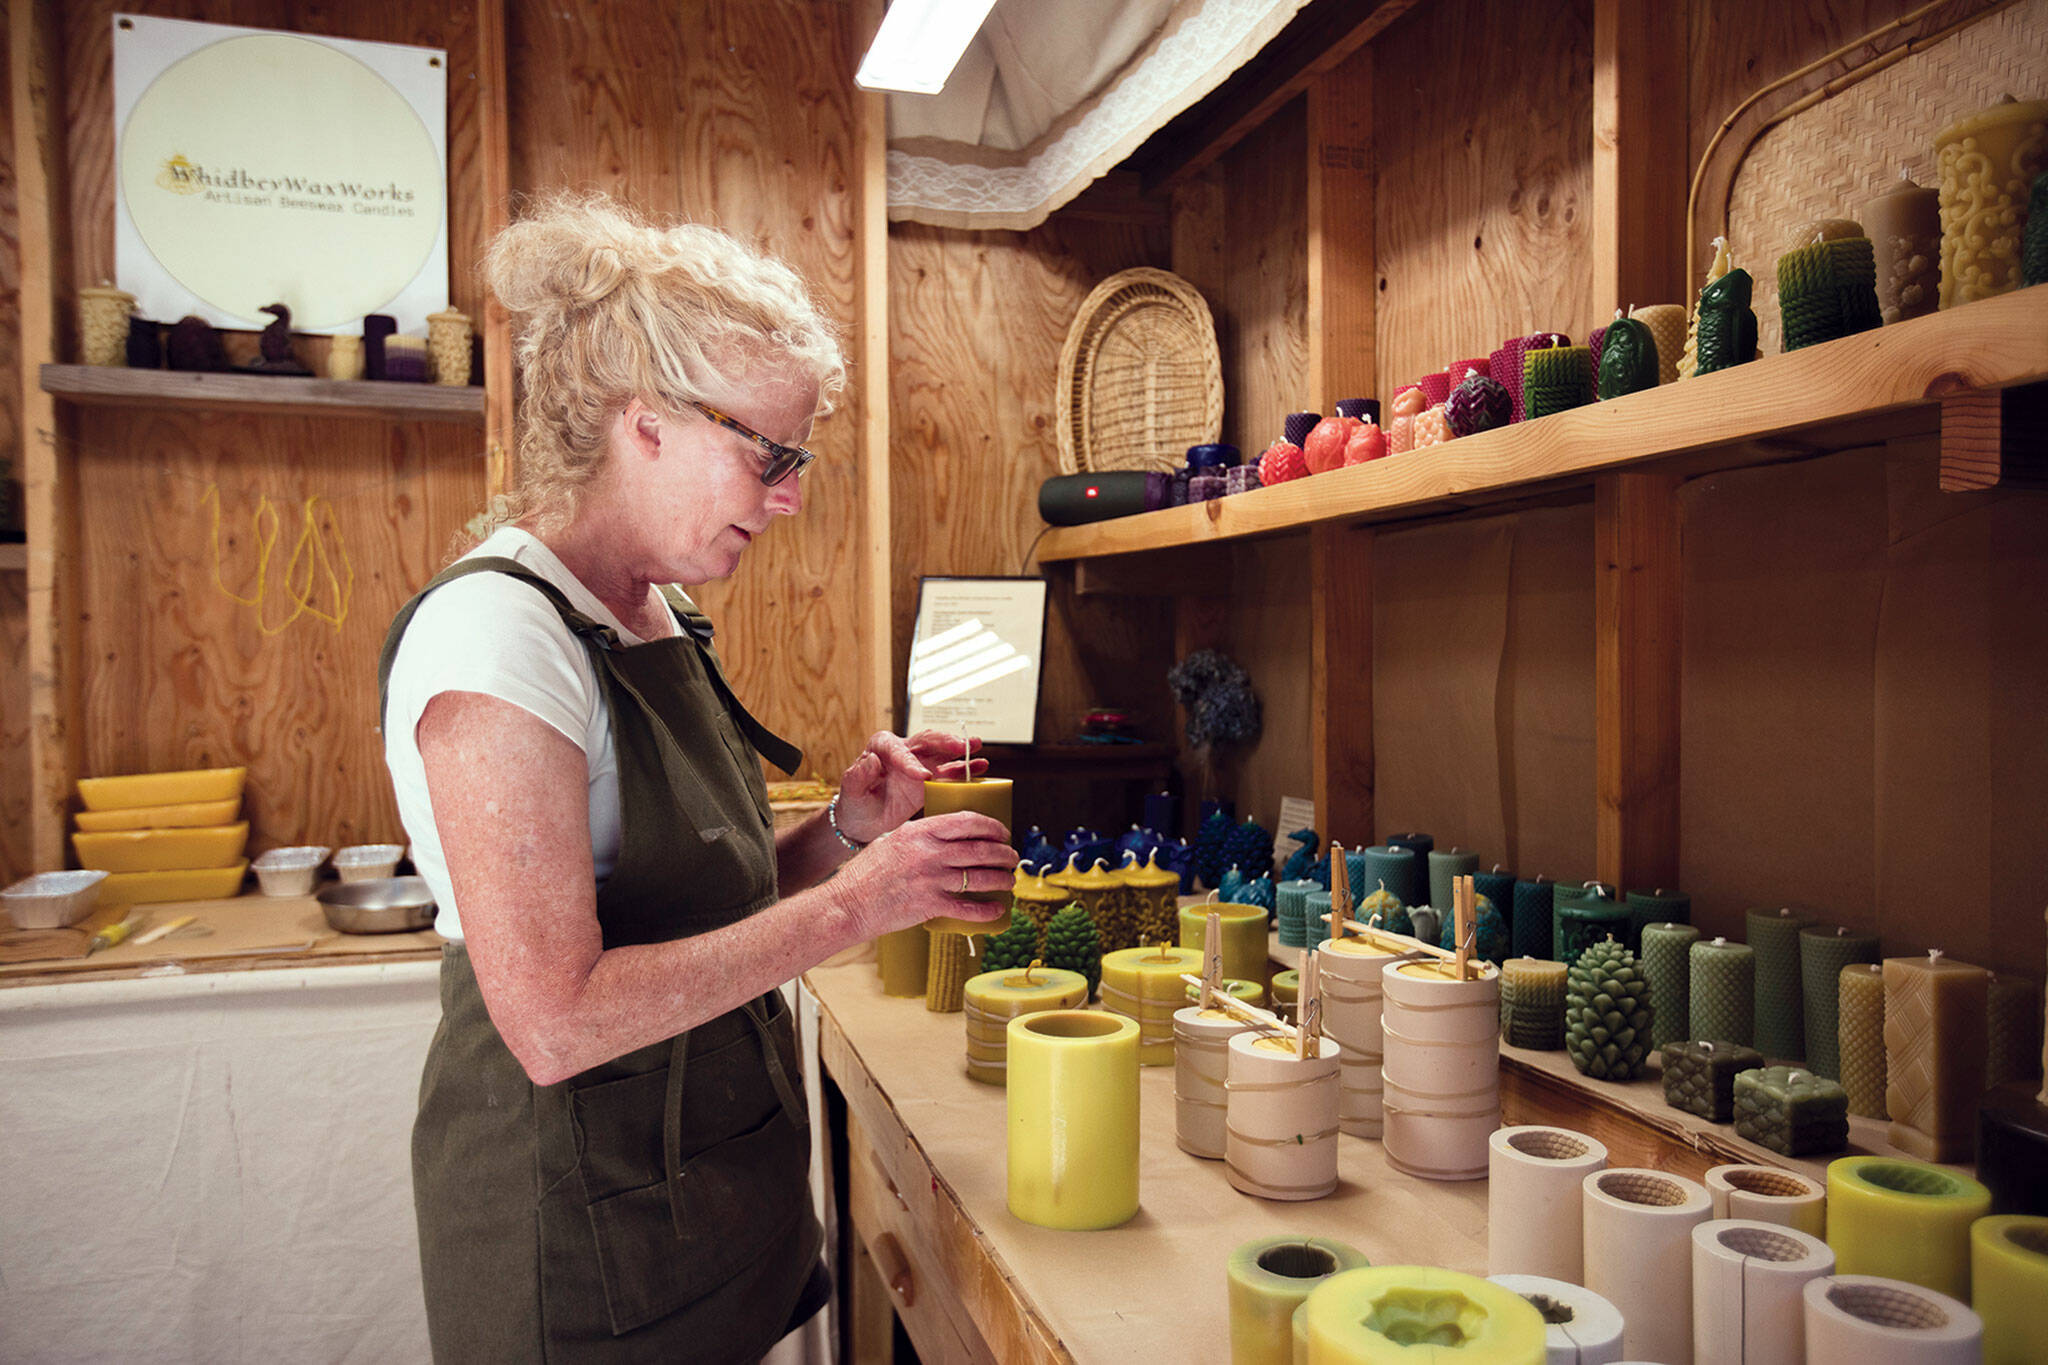 Priscilla Lowry makes candles at her workshop on south Whidbey Island. (Olivia Vanni / The Herald)